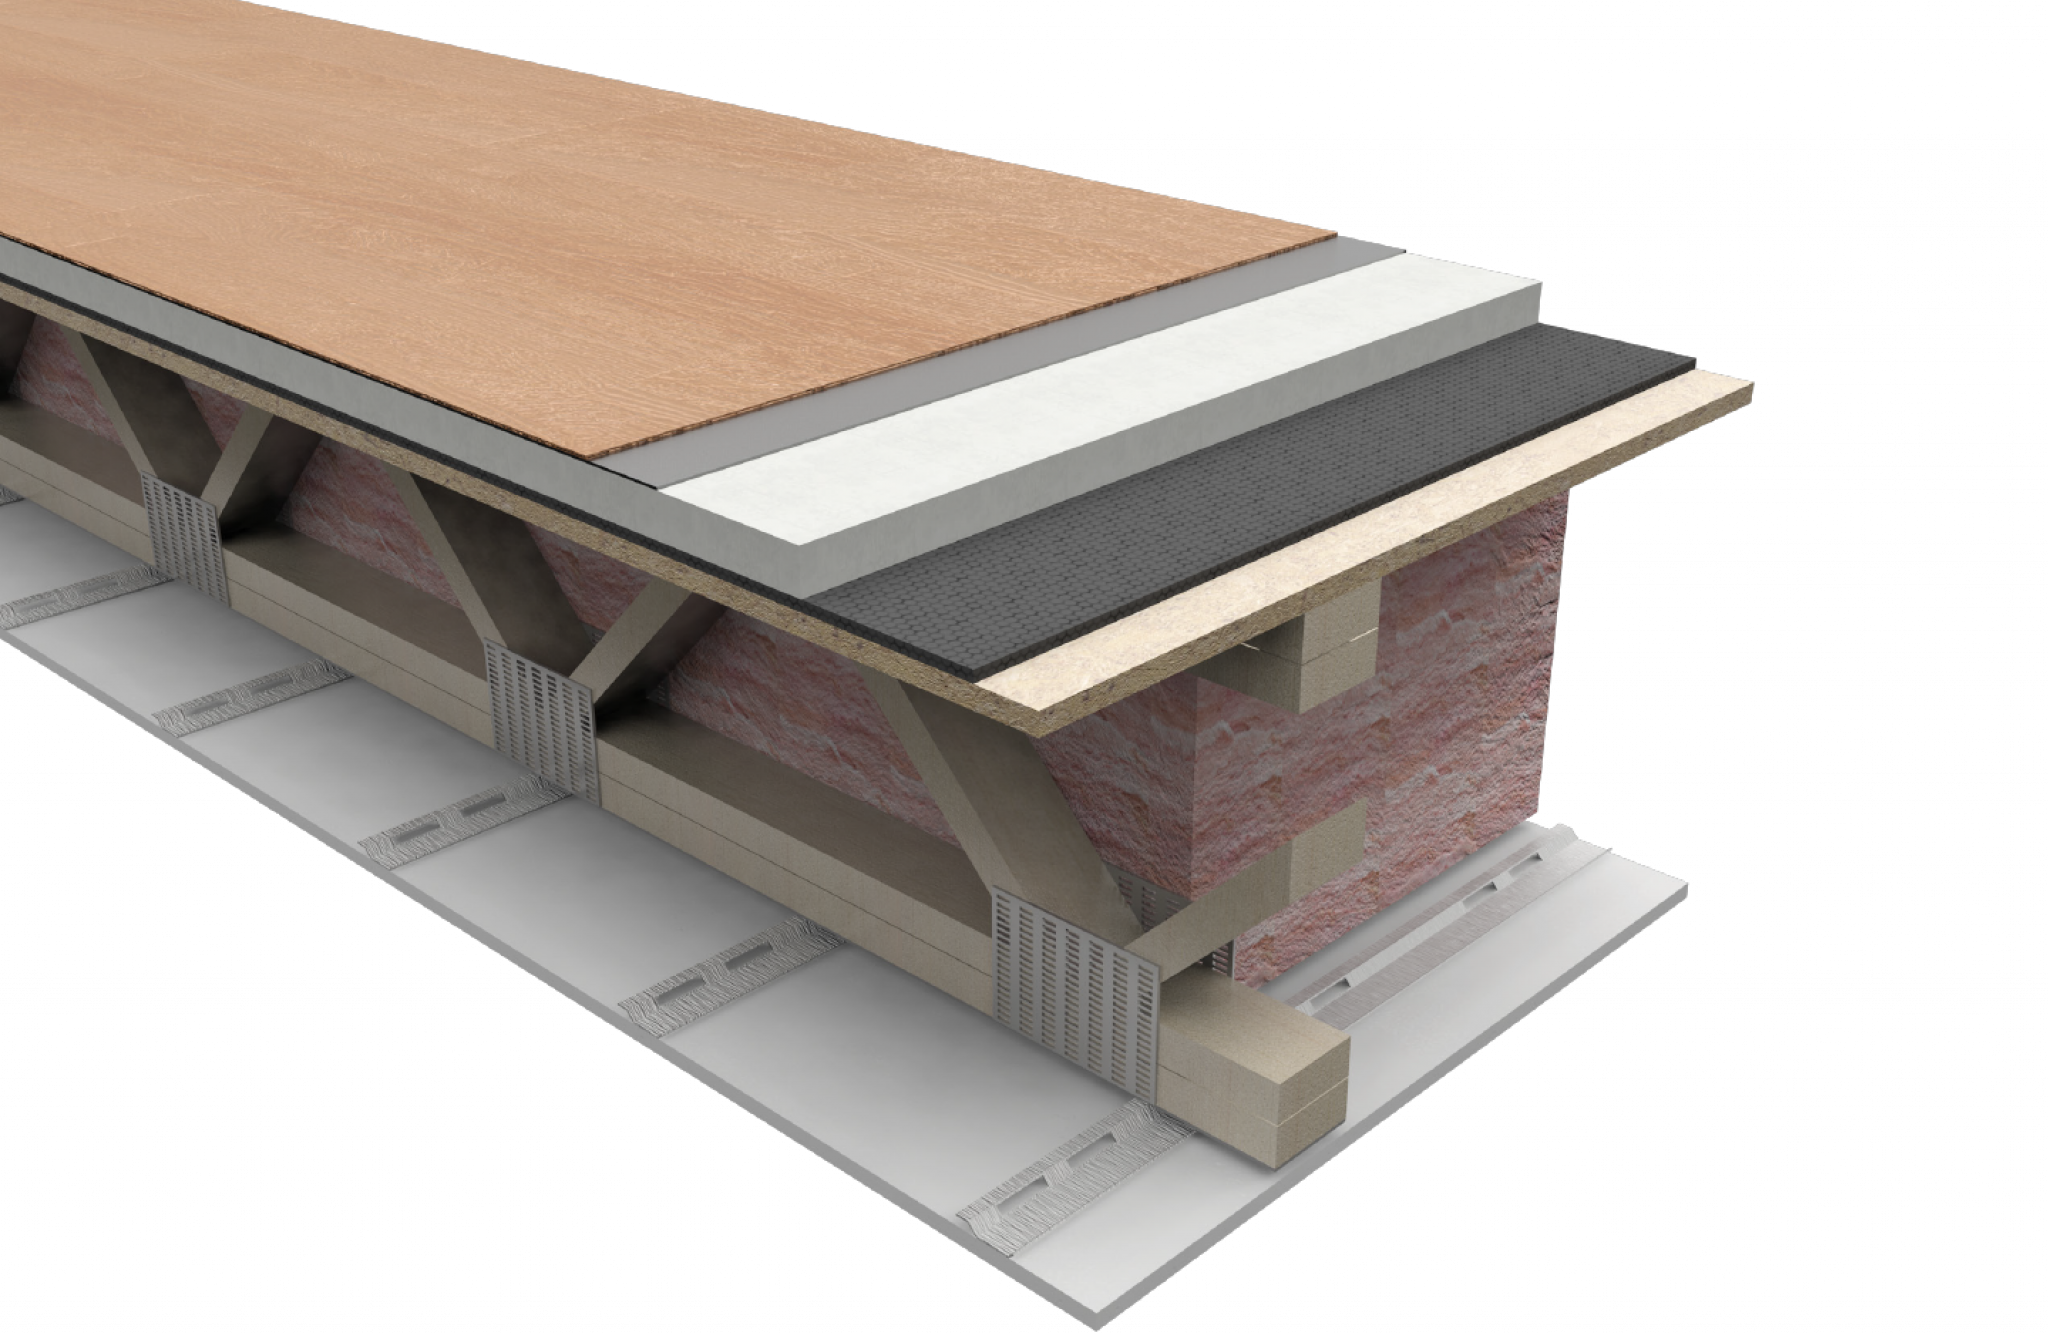 graphic showing extra wall and floor insulation used in construction